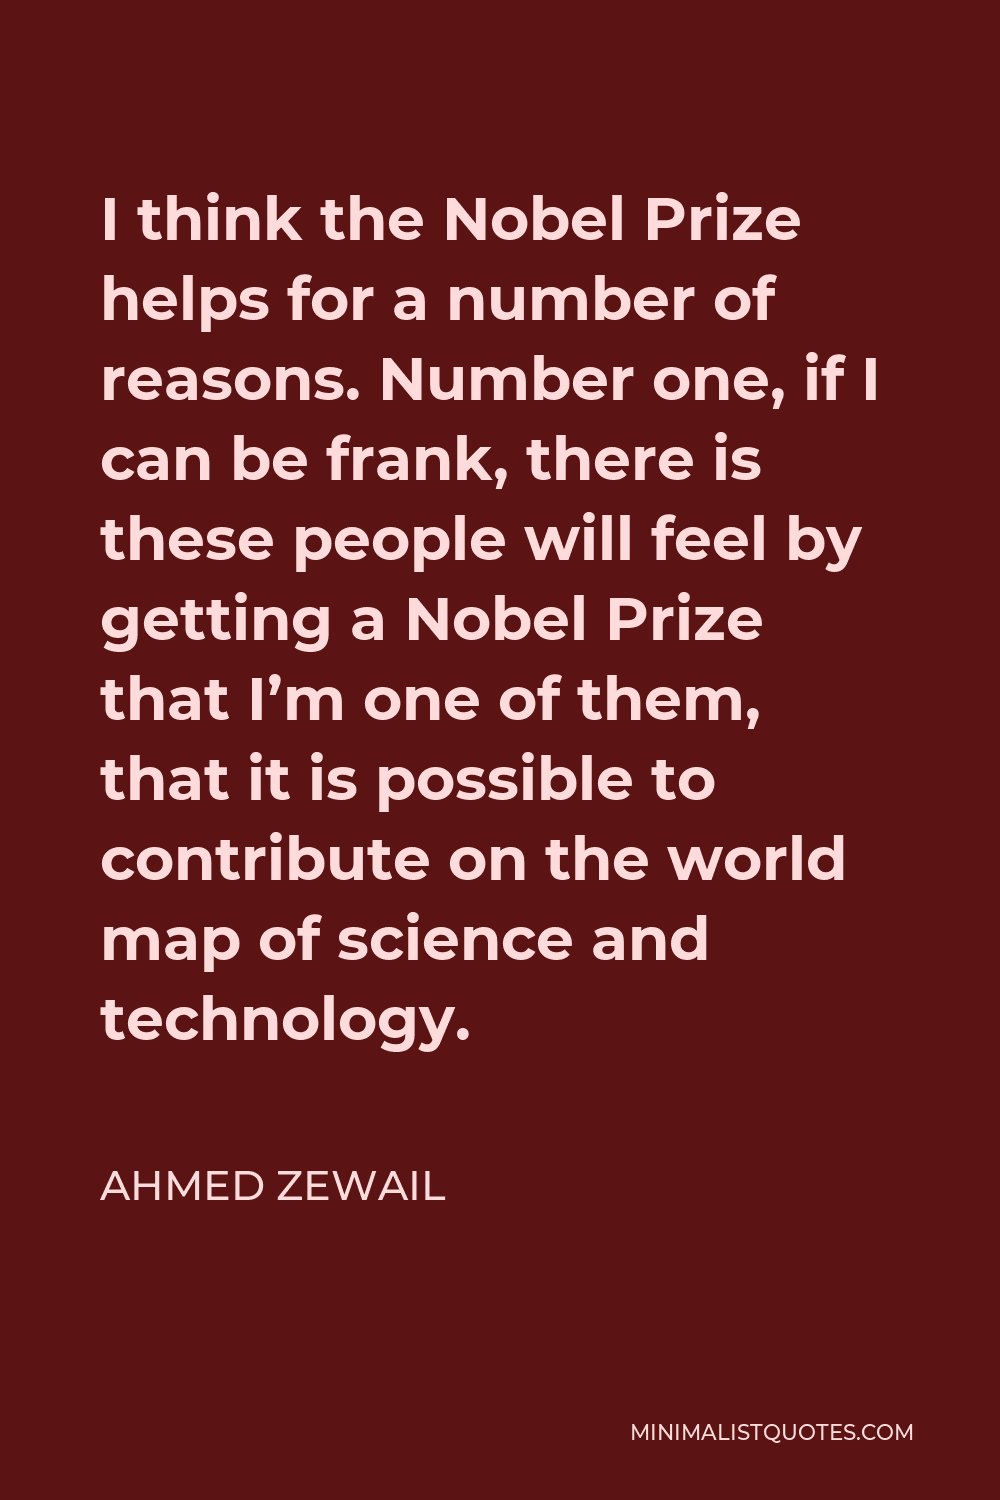 Ahmed Zewail Quote - I think the Nobel Prize helps for a number of reasons. Number one, if I can be frank, there is these people will feel by getting a Nobel Prize that I’m one of them, that it is possible to contribute on the world map of science and technology.